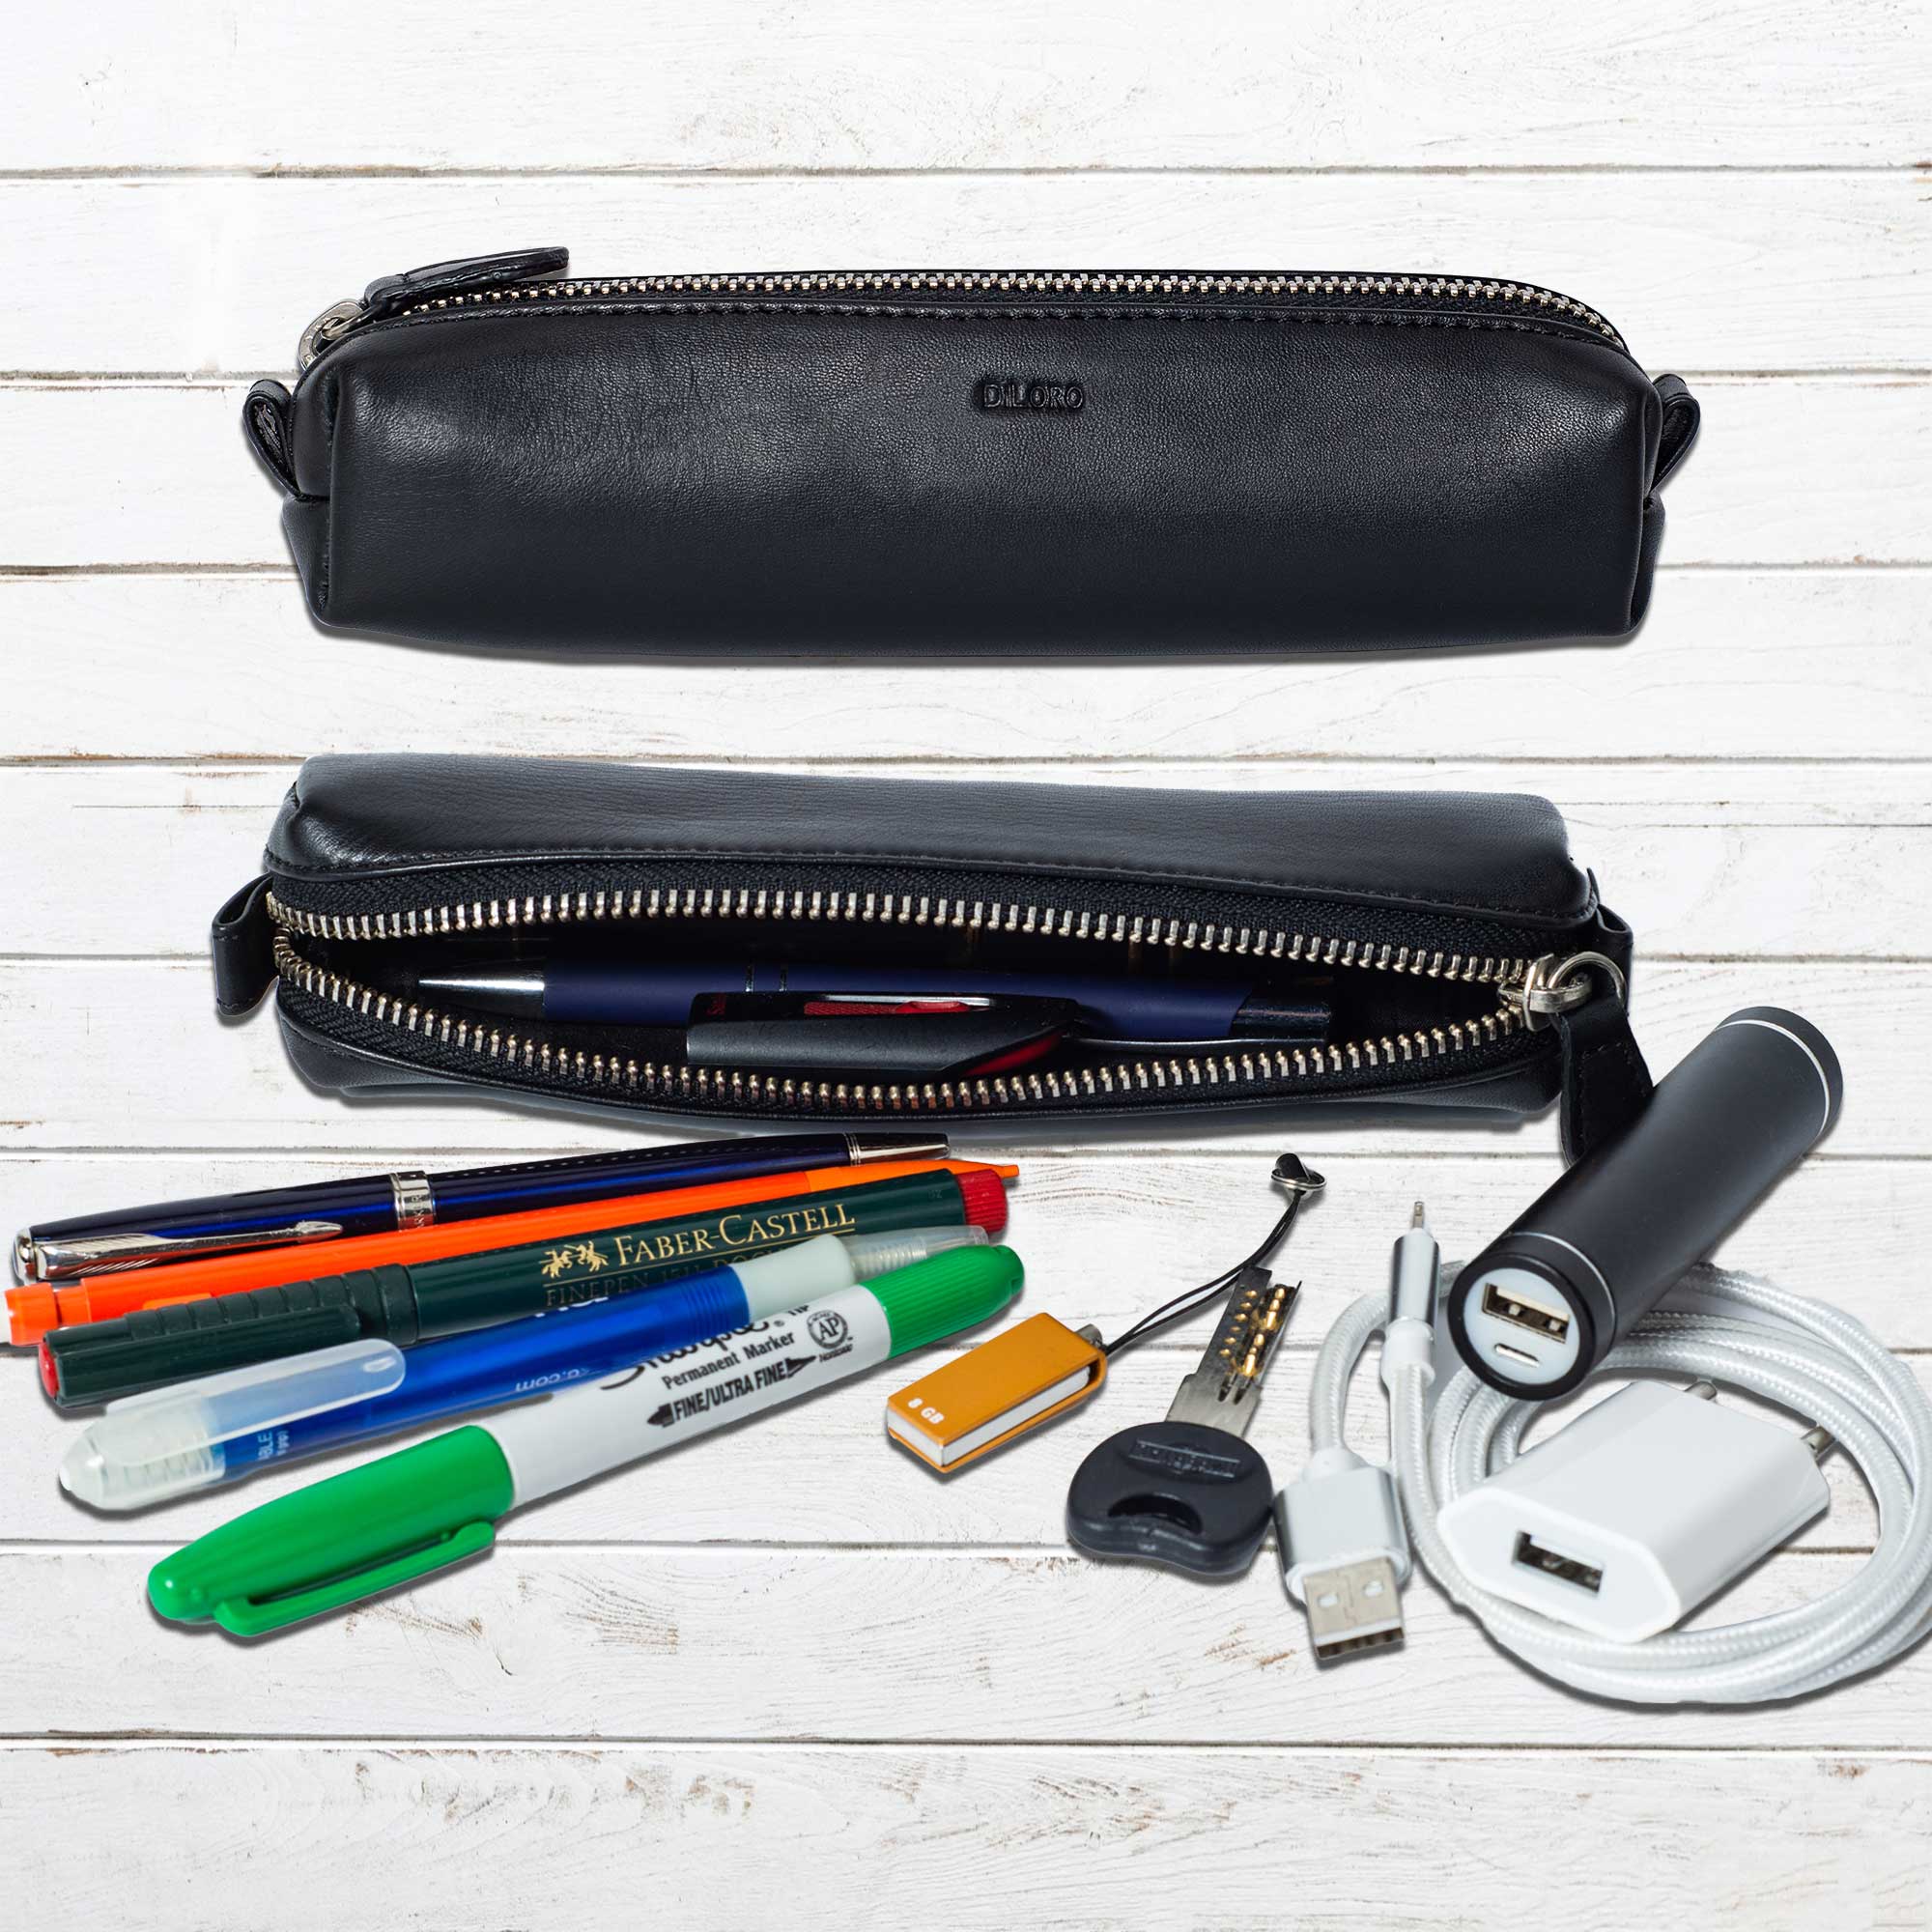 DiLoro Pen & Pencil Case: YKK zippered pencil, pen case made from top quality, full grain black nappa leather.